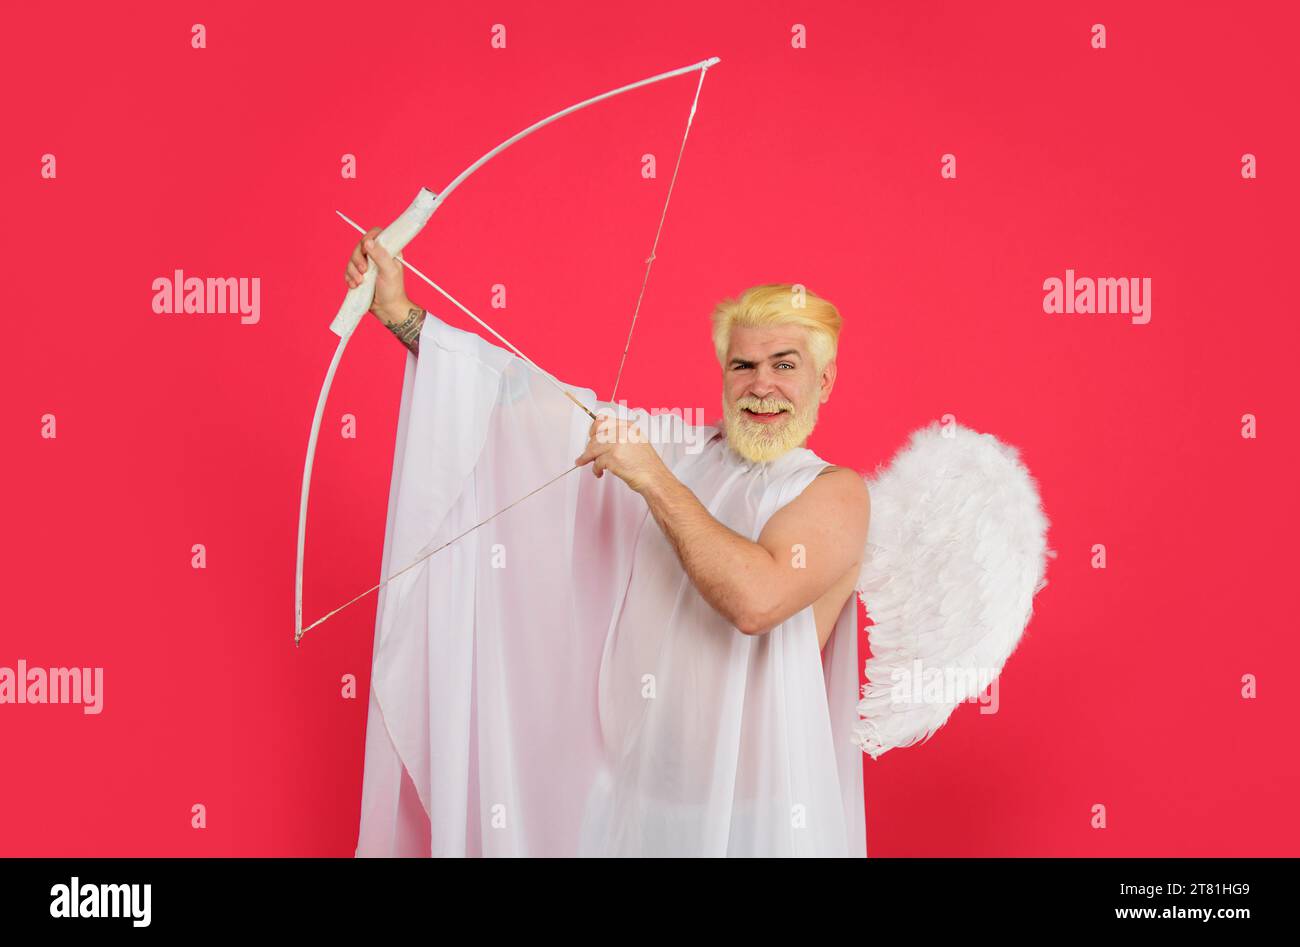 Happy Valentines Day. Cupid angel with bow and arrows. Smiling bearded man in white angel wings shooting love arrow. Male angel with bow and arrow in Stock Photo